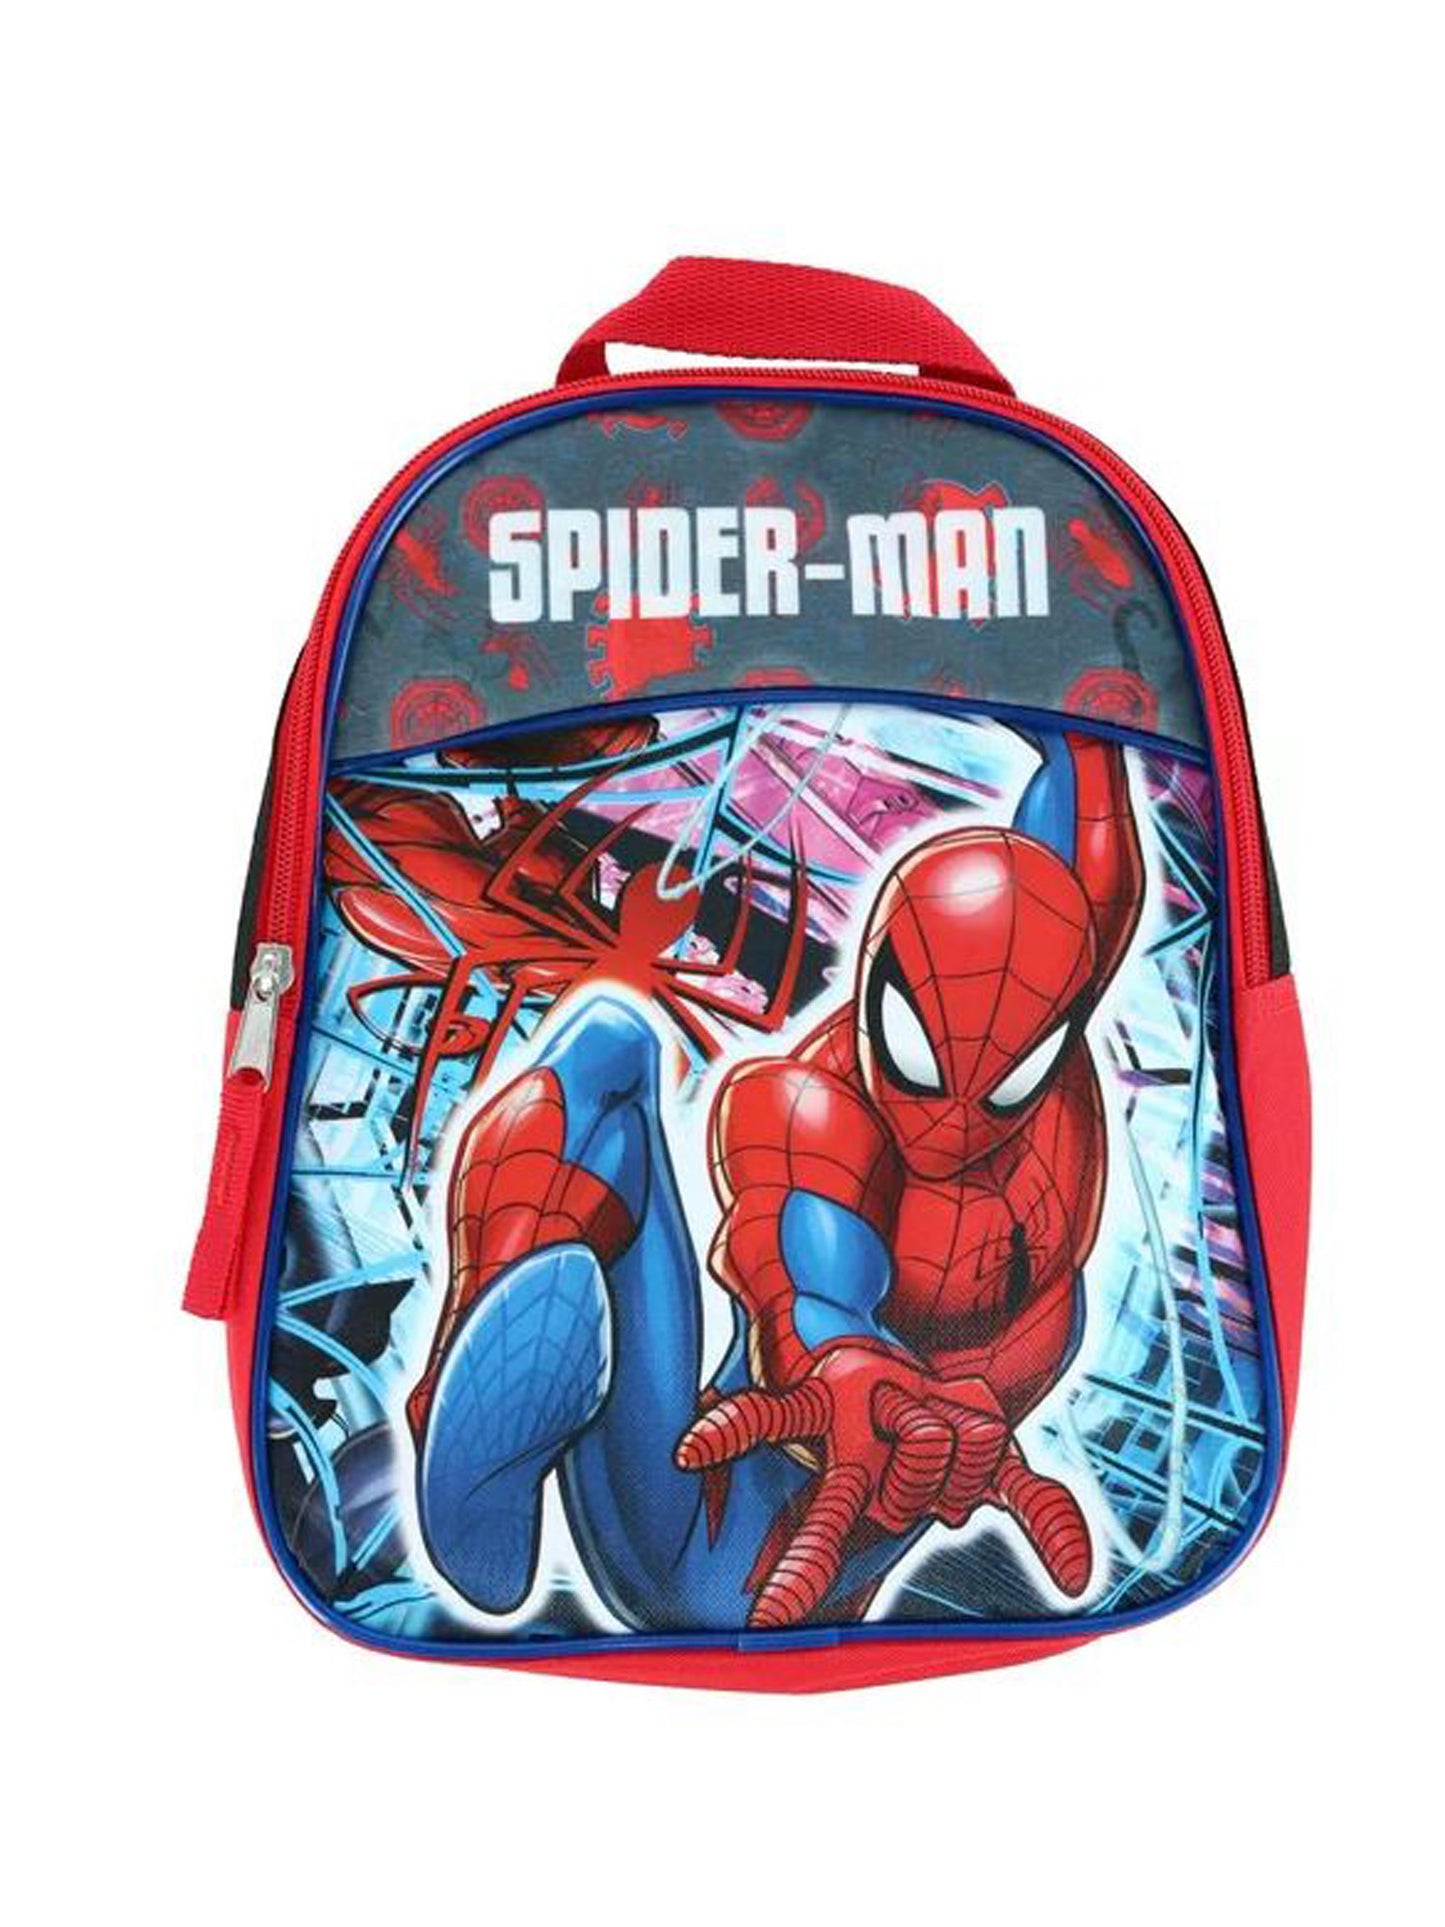 Spider-Man Mini 11" Backpack Boys w/ Marvel Insulated Lunch Bag Red Set